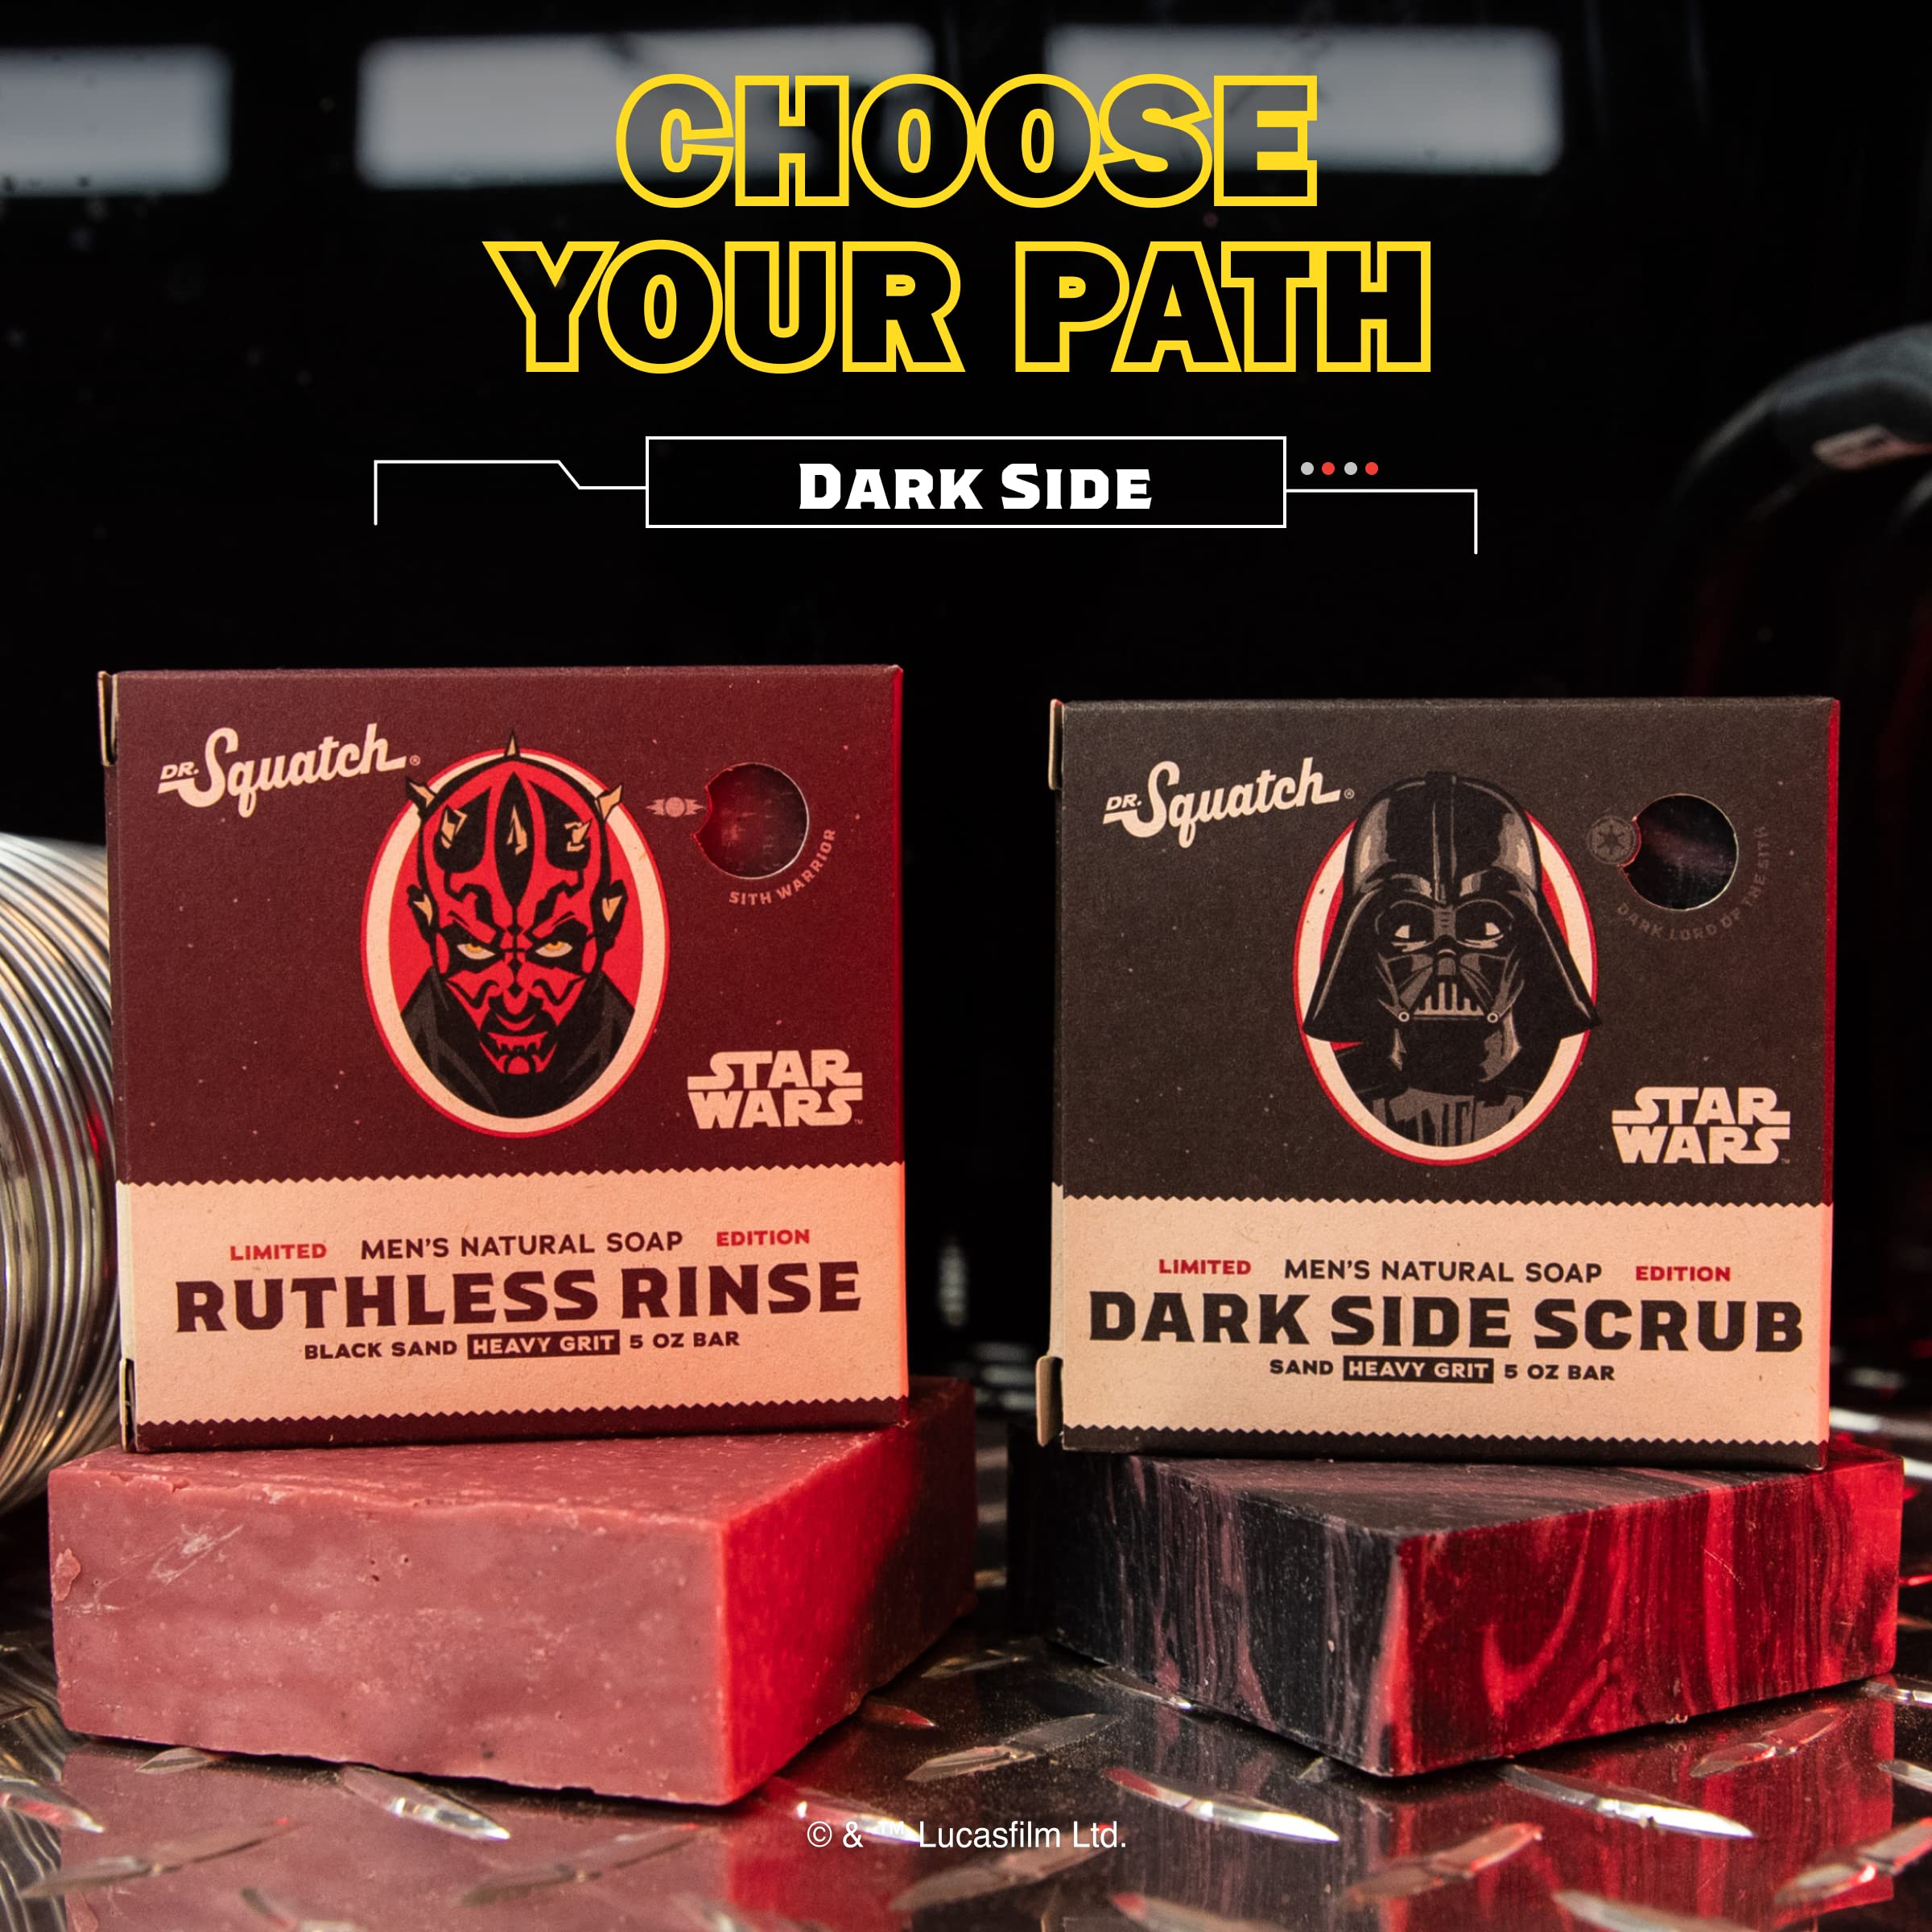 Dr. Squatch The Soap Star Wars Soap Collection Episode 1 with Collector’s Box - Men’s Natural 4 Bar Soap Bundle and Star Wars Soap for Men